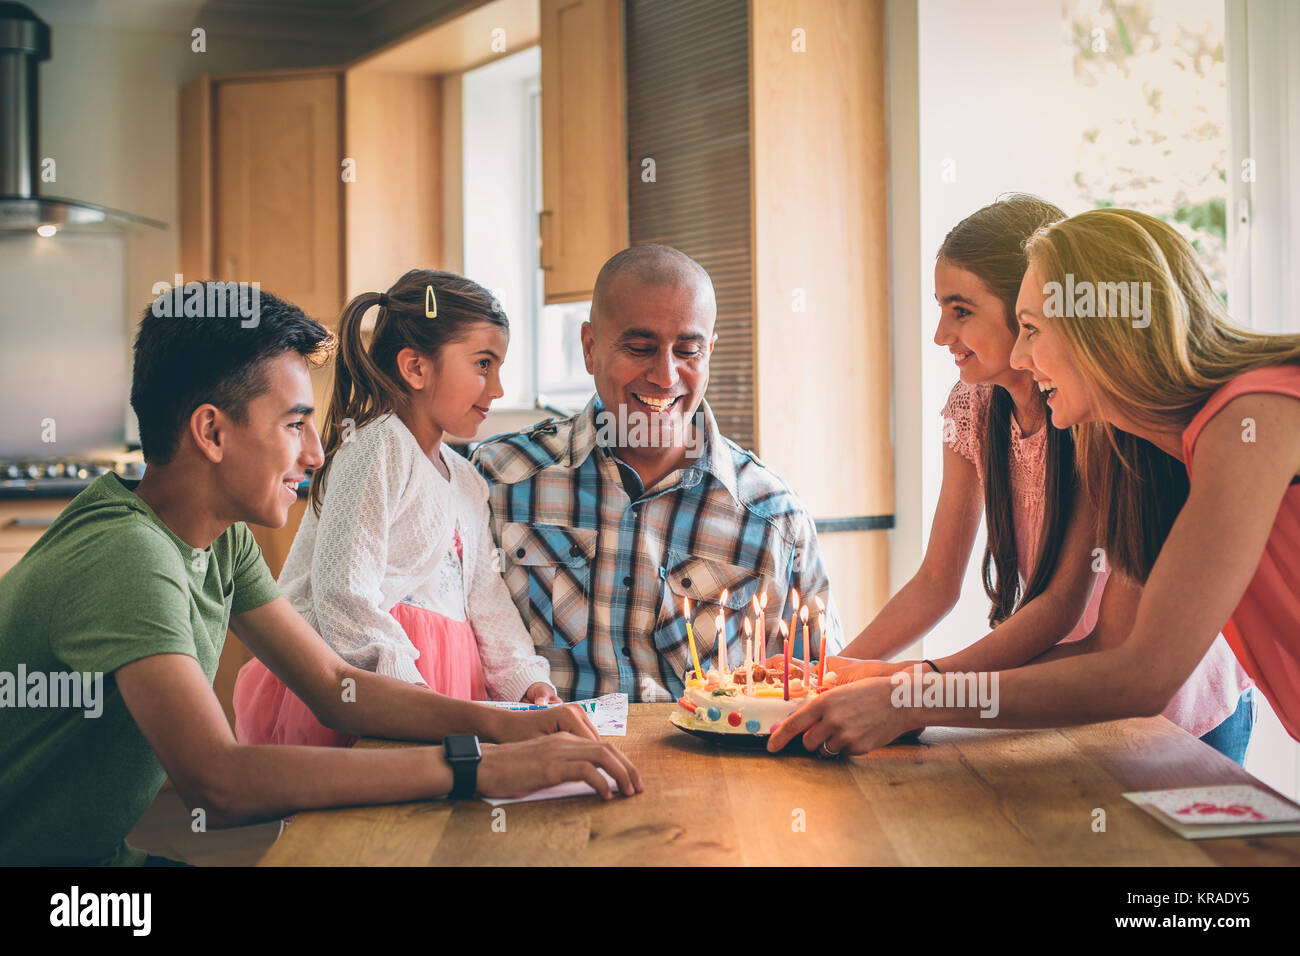 Blow out the candles! Stock Photo